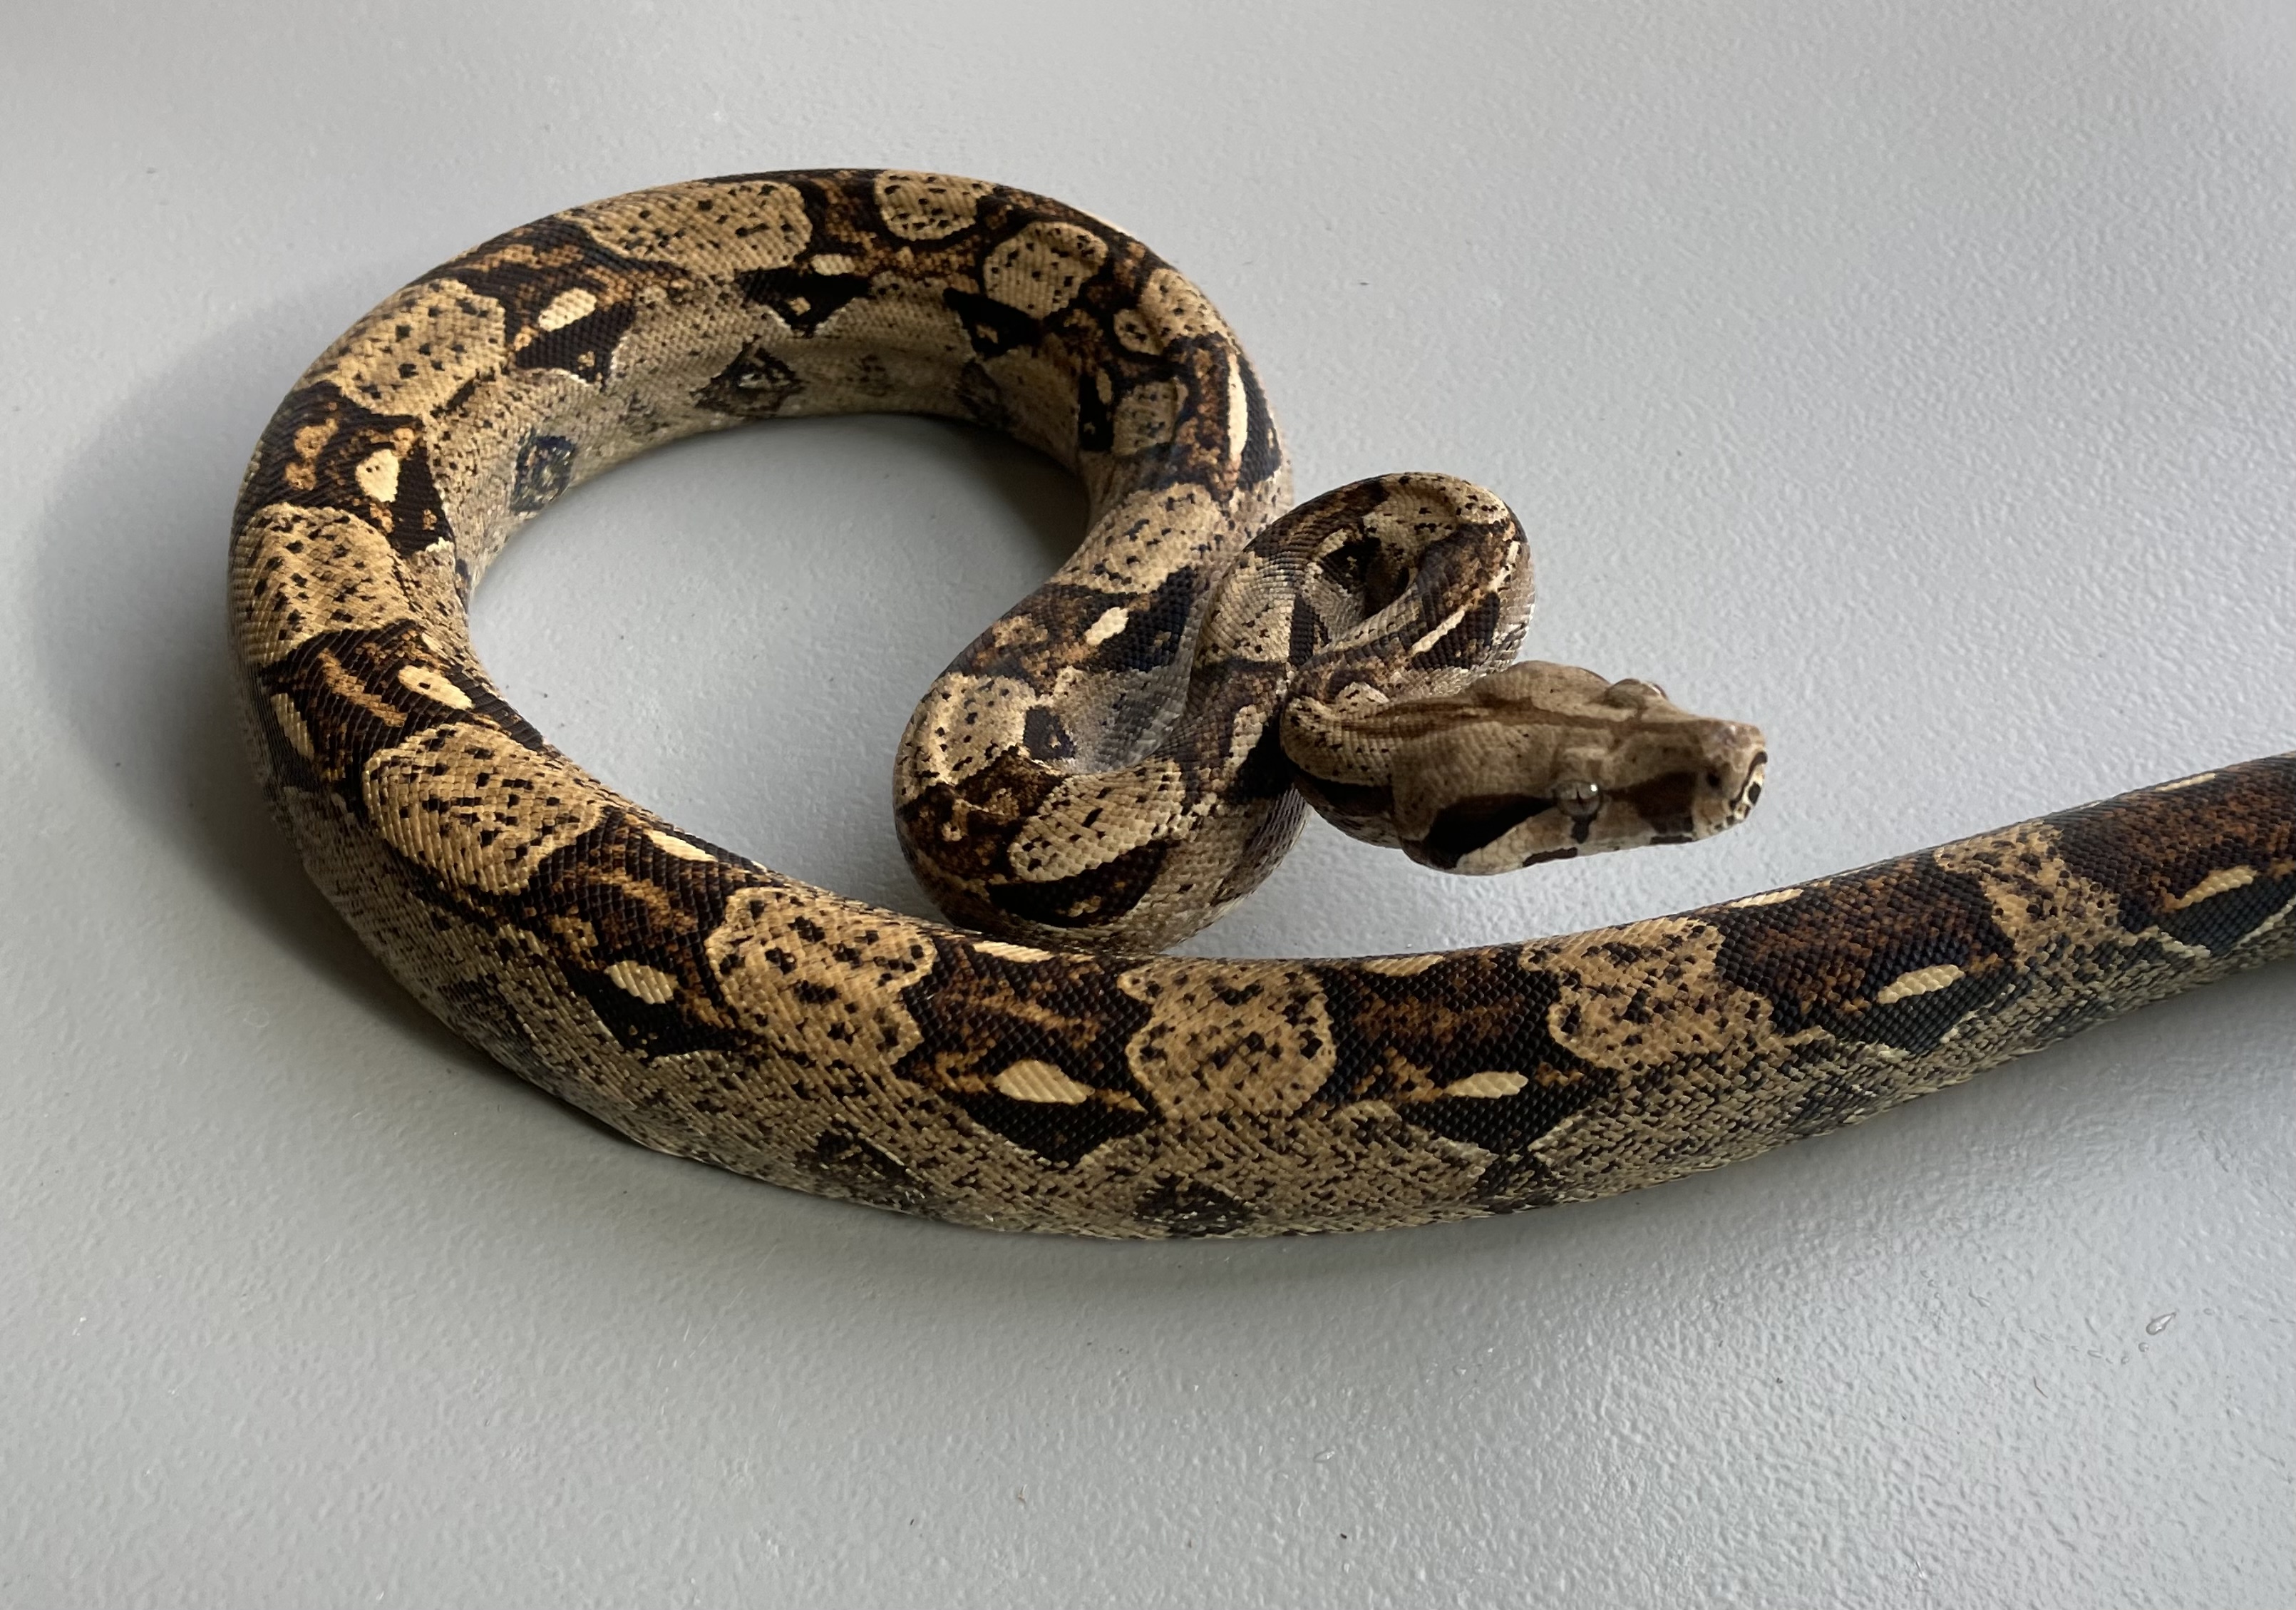 BWC Male Boa Constrictor by Carolina Herps